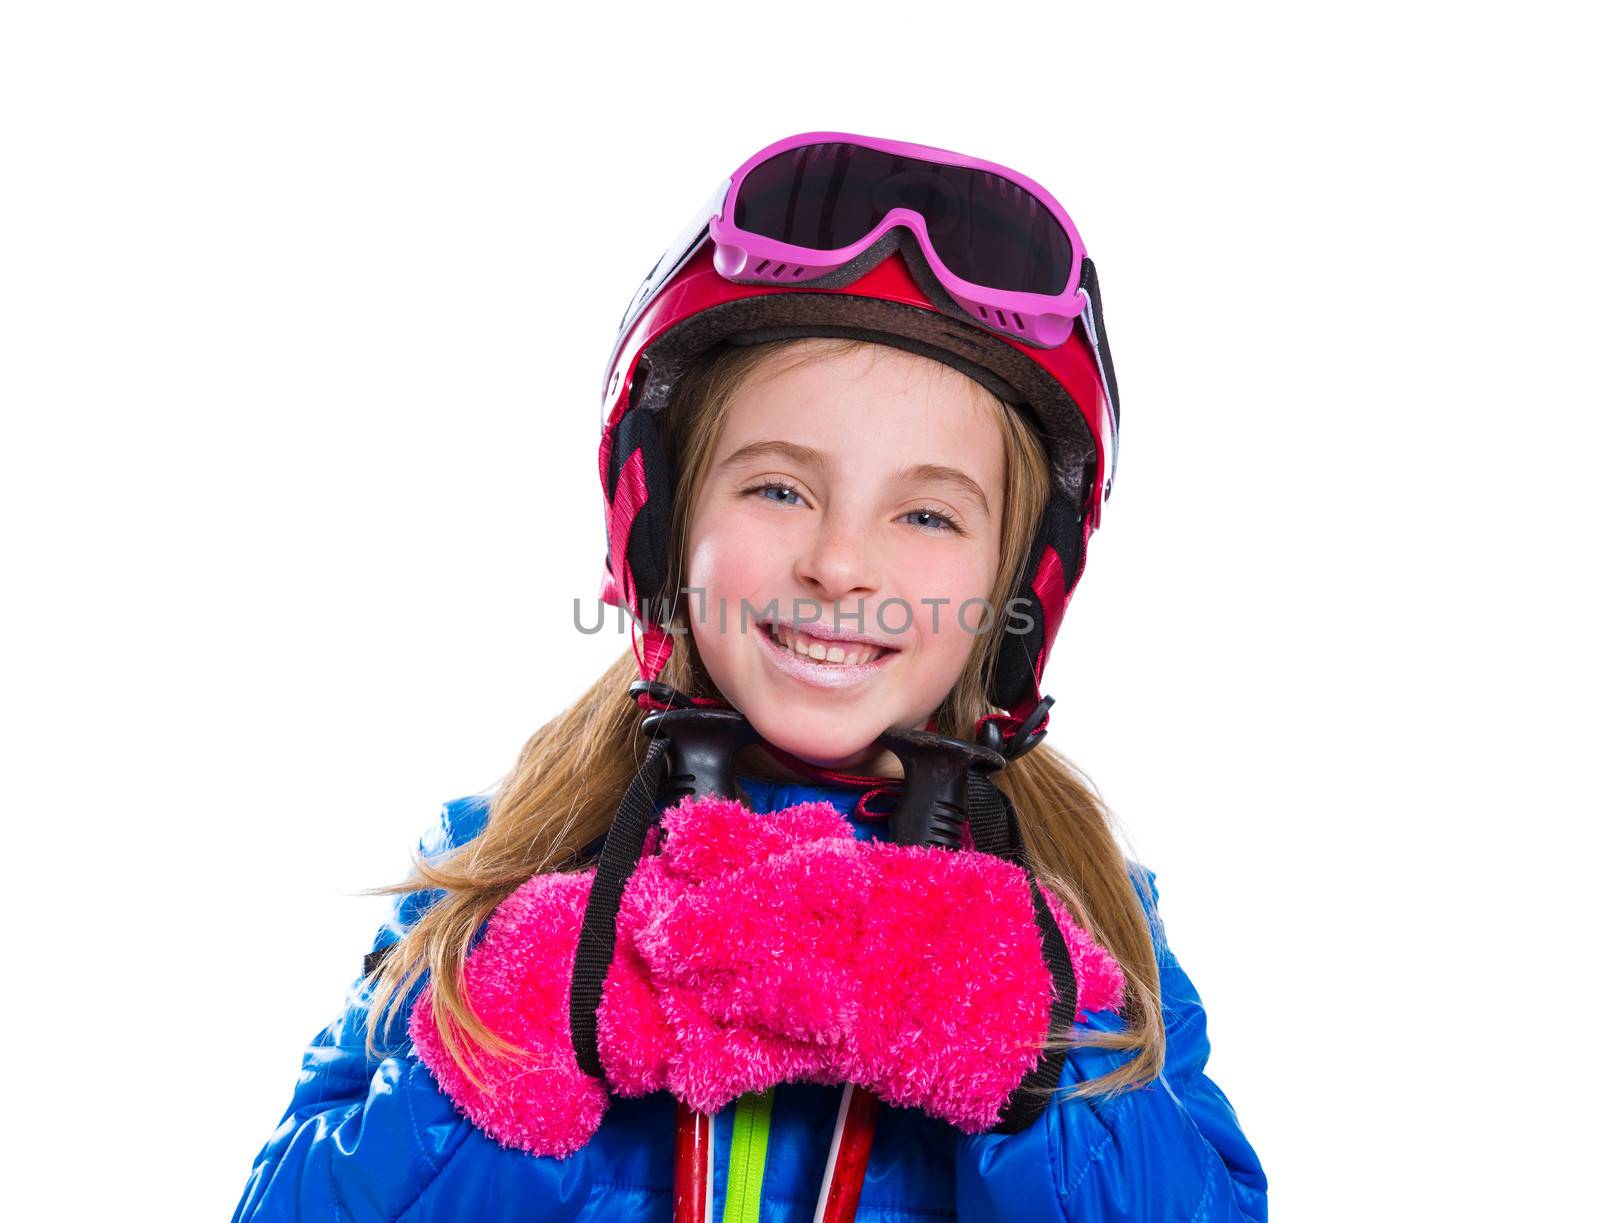 Blond kid girl happy going to snow with ski poles and helmet by lunamarina